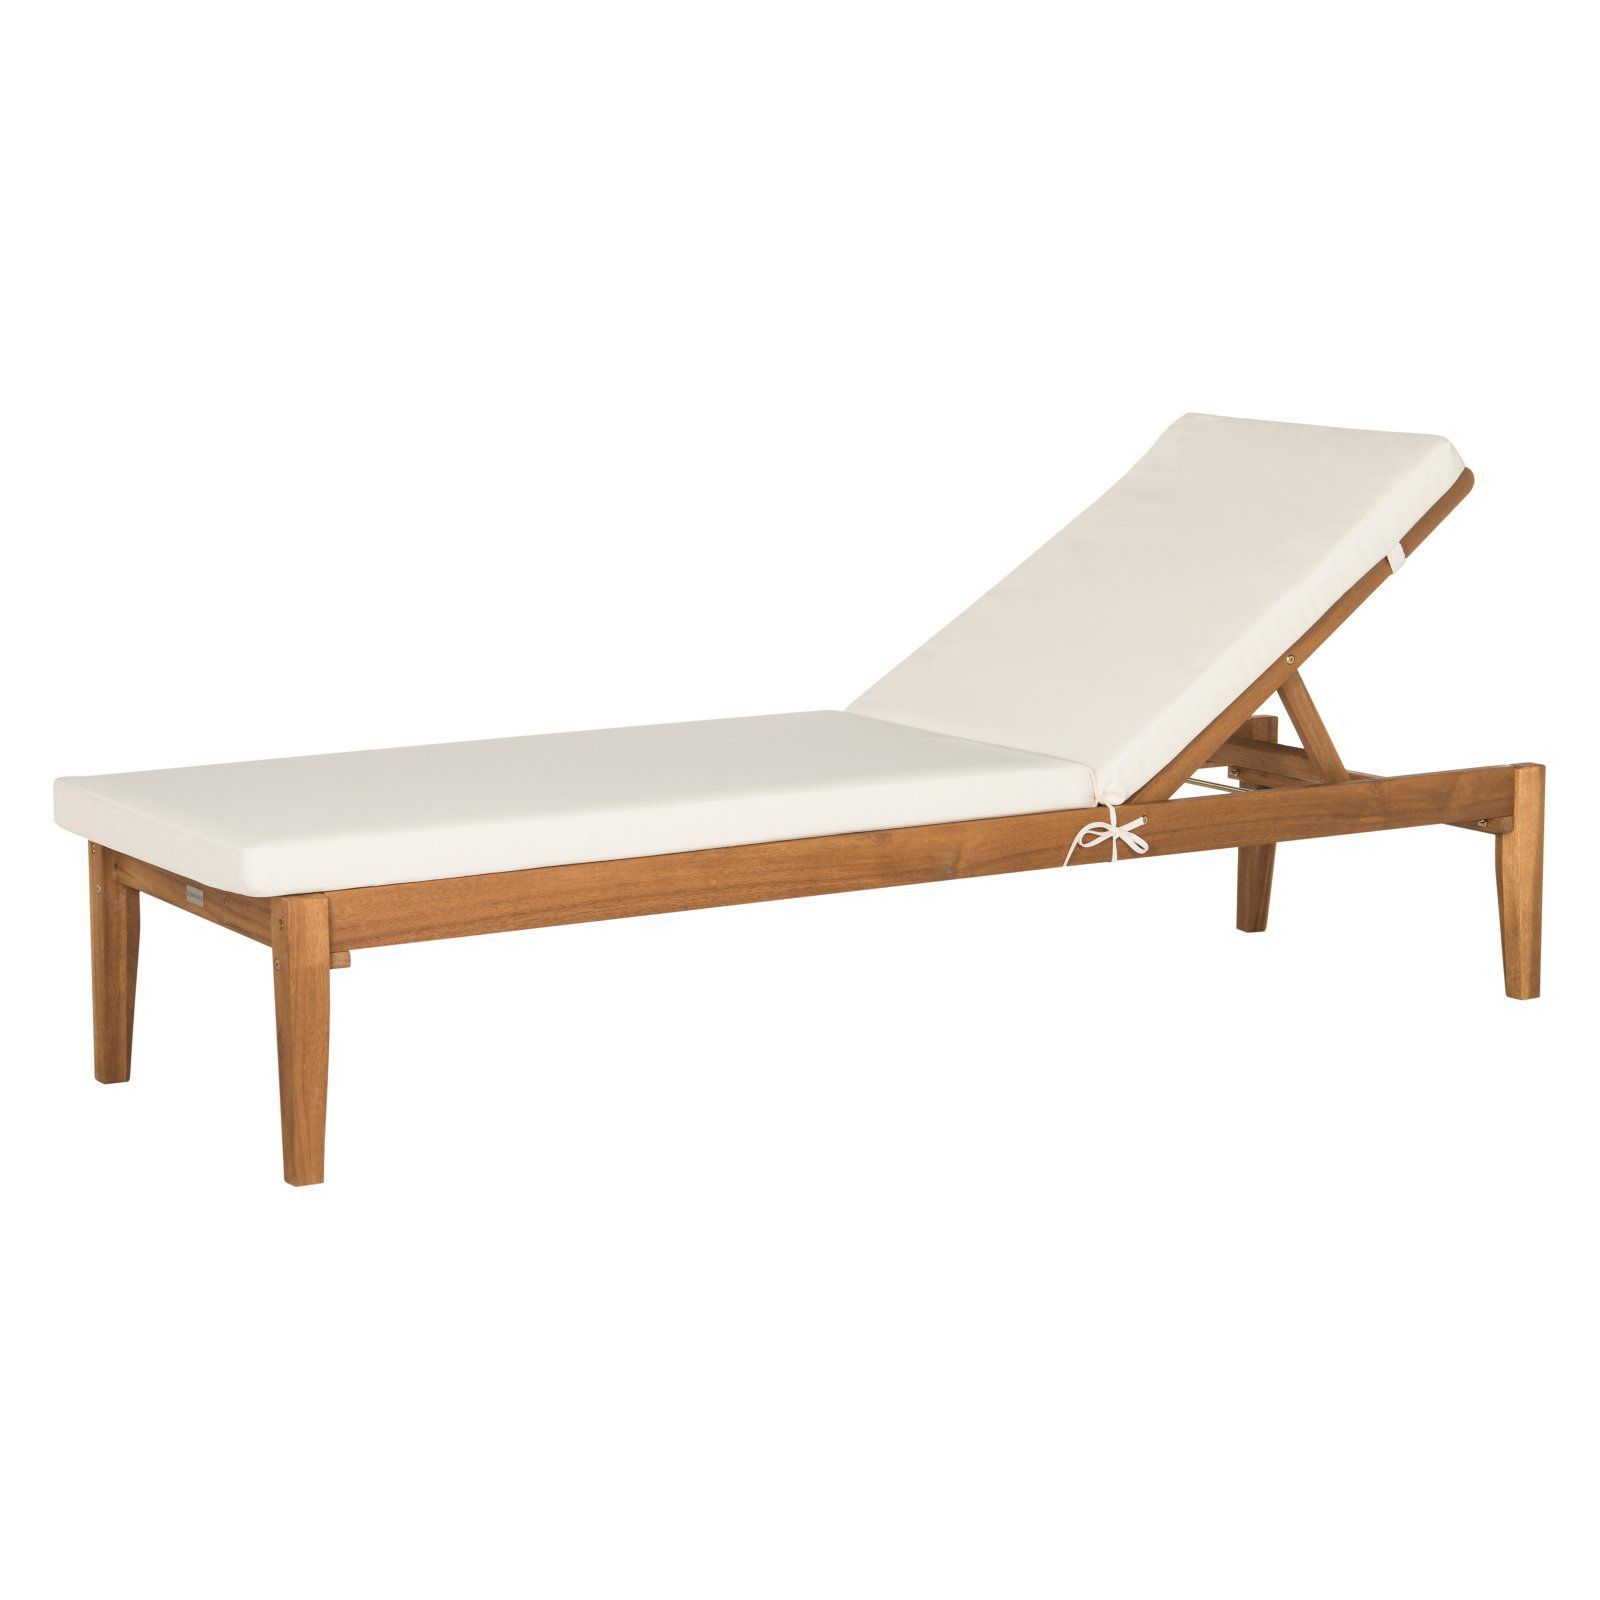 Havenside Home Surfside Rutkoske Outdoor Wood Chaise Lounges For Current Safavieh Arcata Sunlounger Outdoor Chaise Lounge Chair In (View 19 of 25)